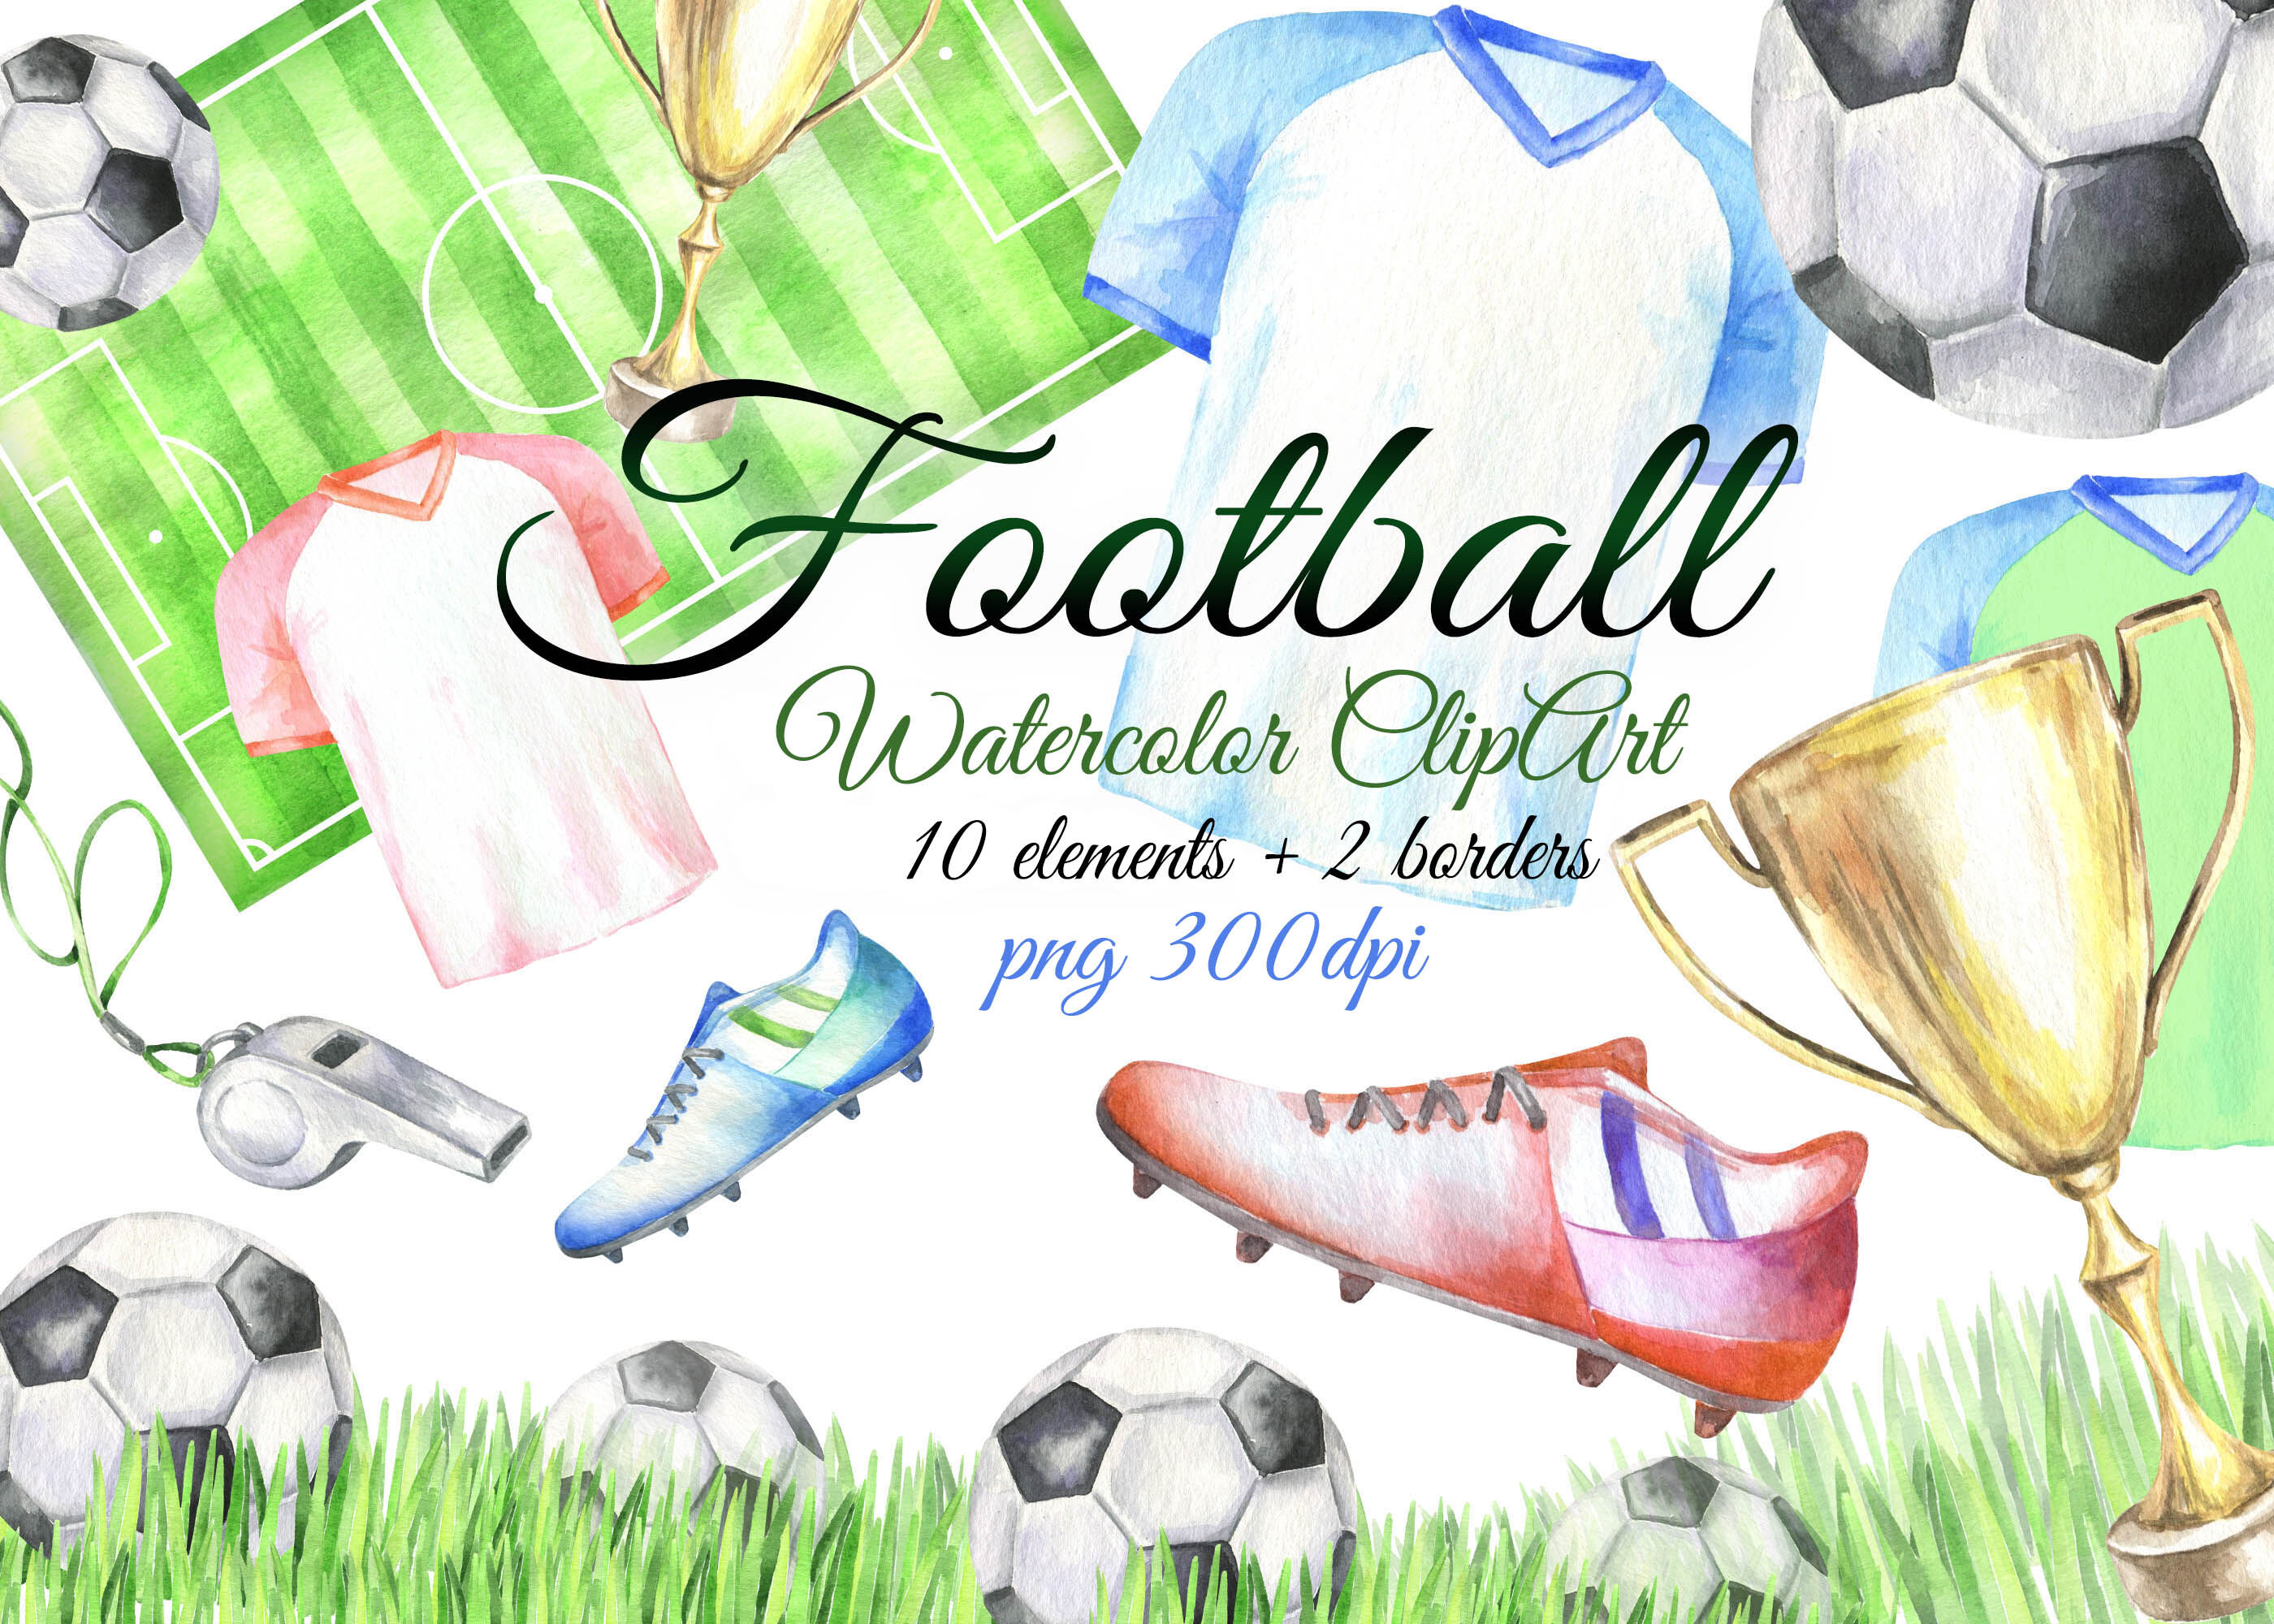 borders and clipart and football